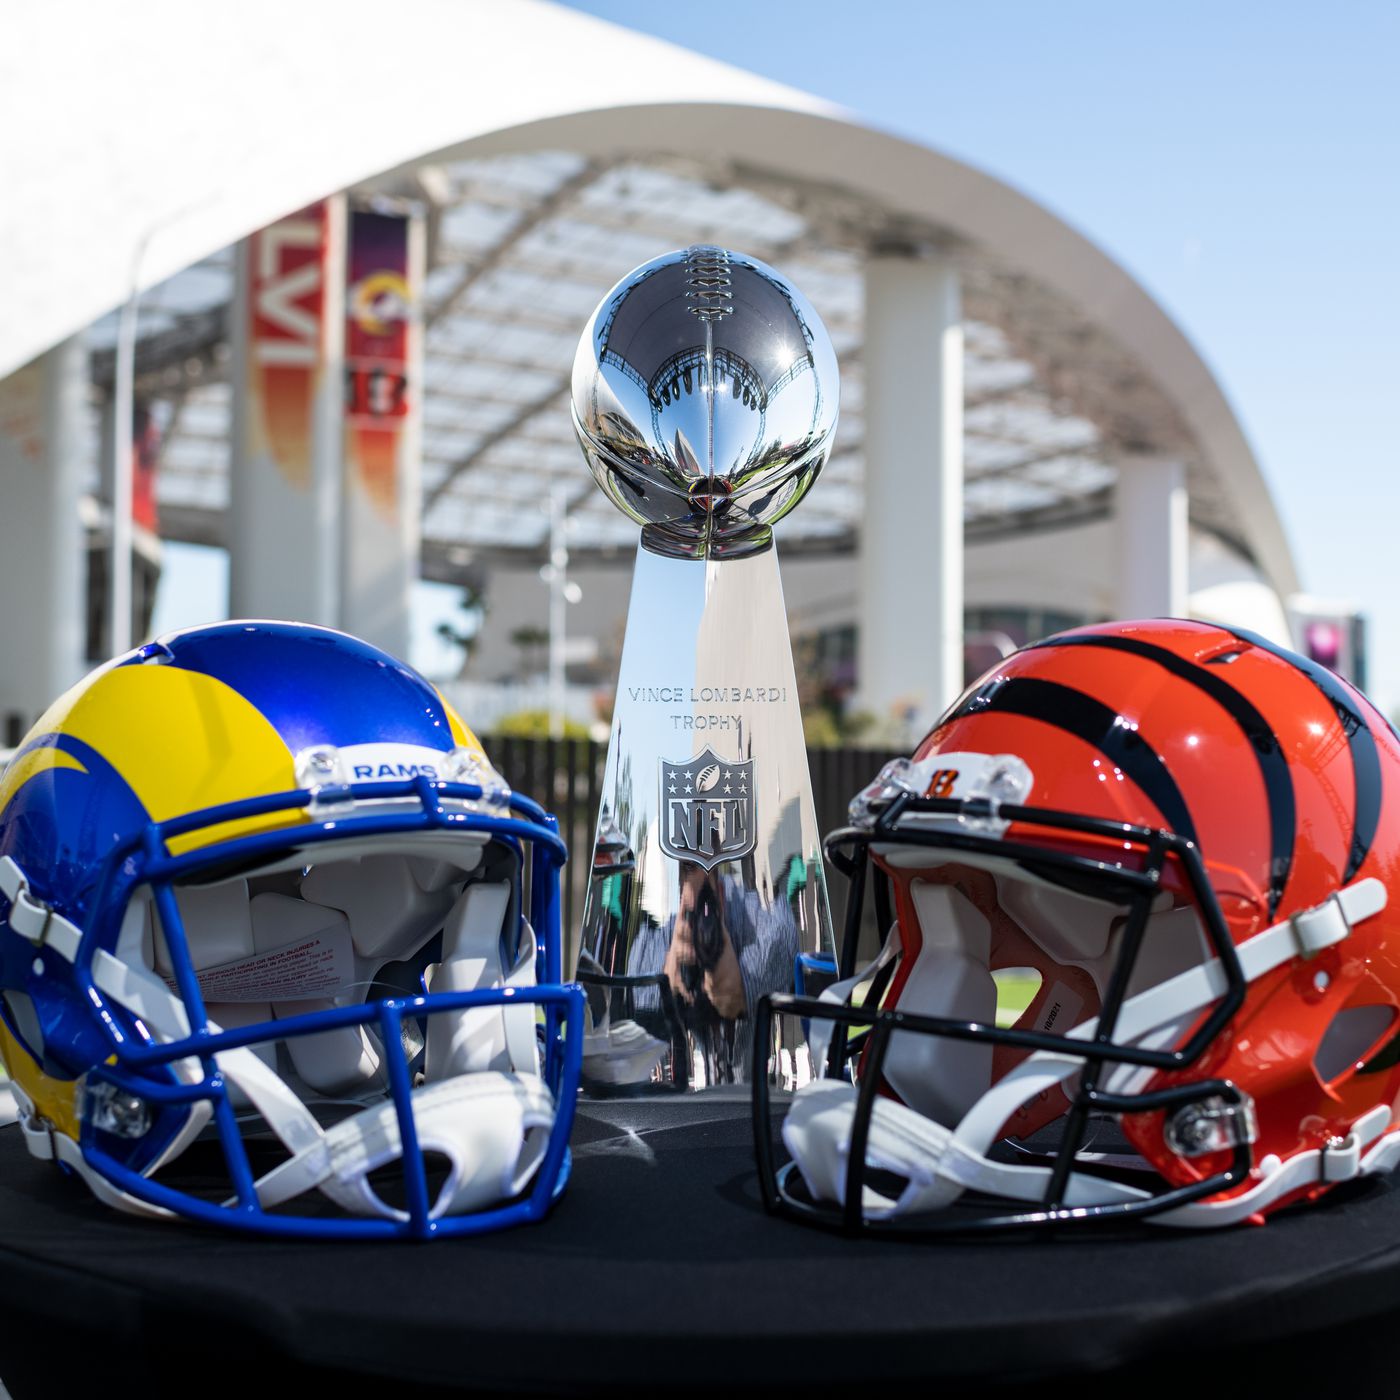 Super Bowl predictions 2022: Who's winning Rams vs. Bengals on Sunday - Cat  Scratch Reader